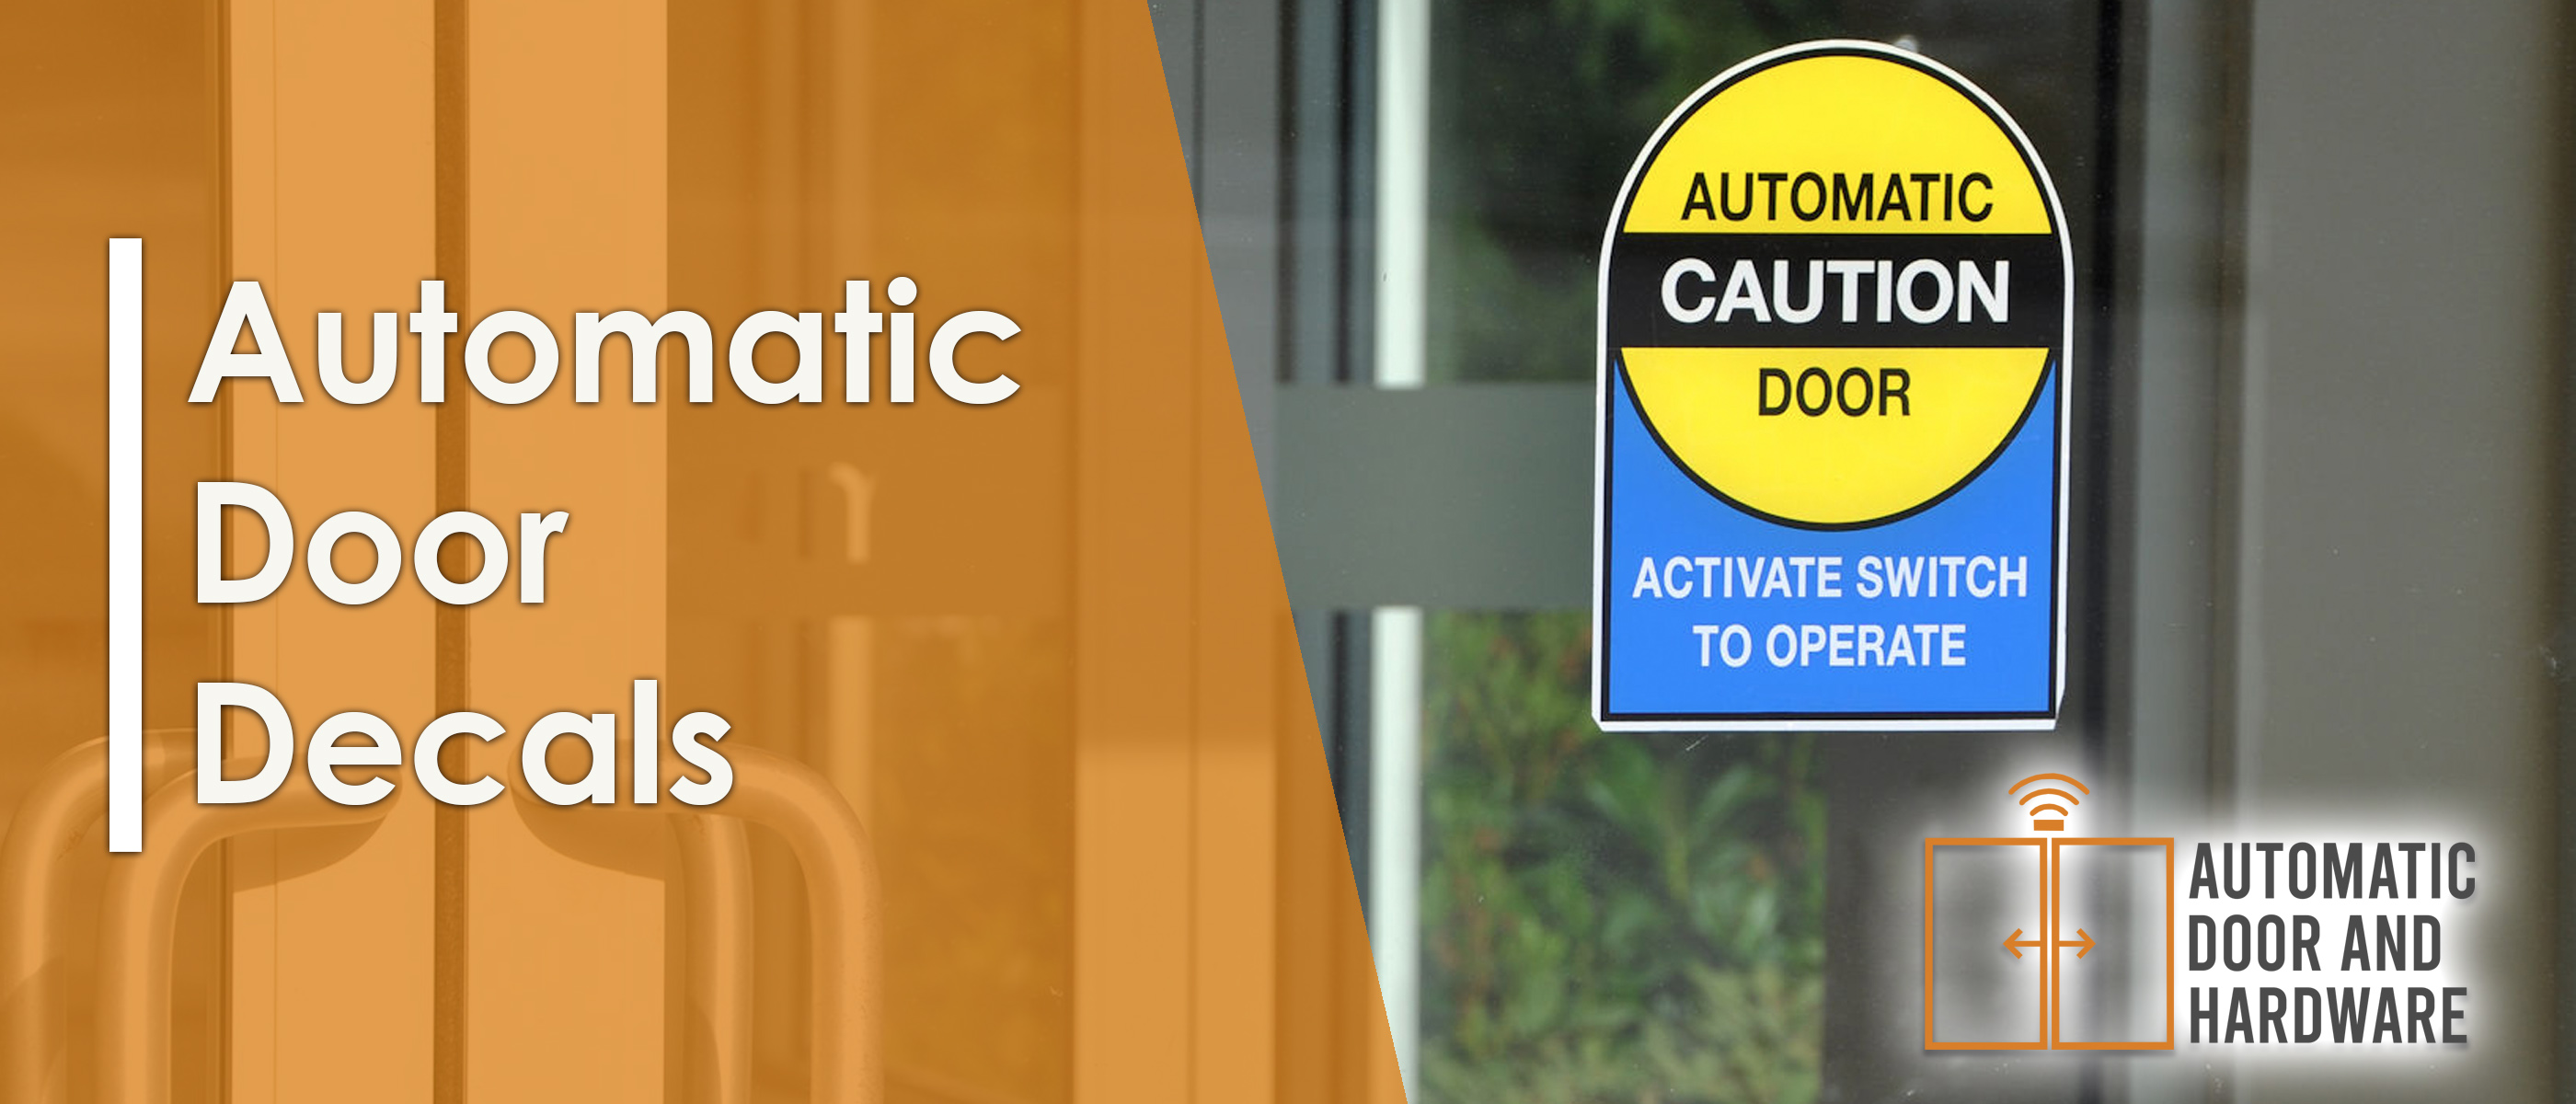 Automatic Door Self Adhesive Vinyl Decal Safety Sign 150mm x 50mm warn0010 